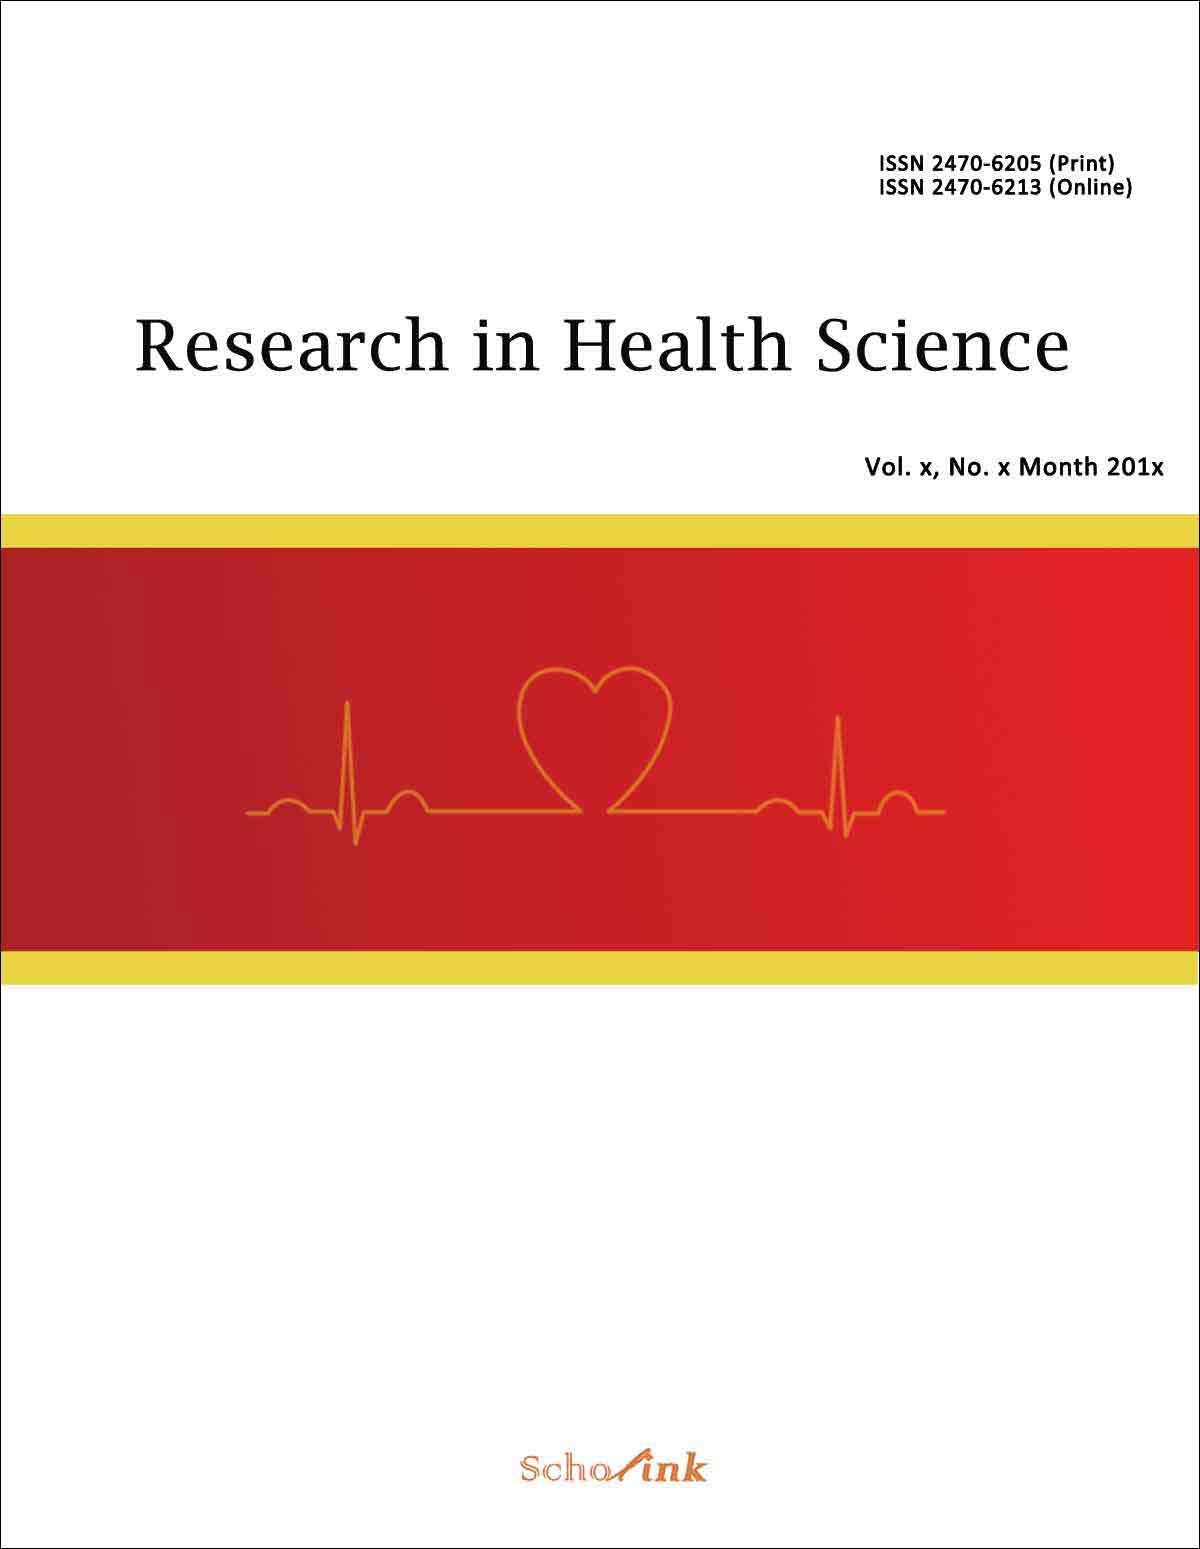 Research in Health Science